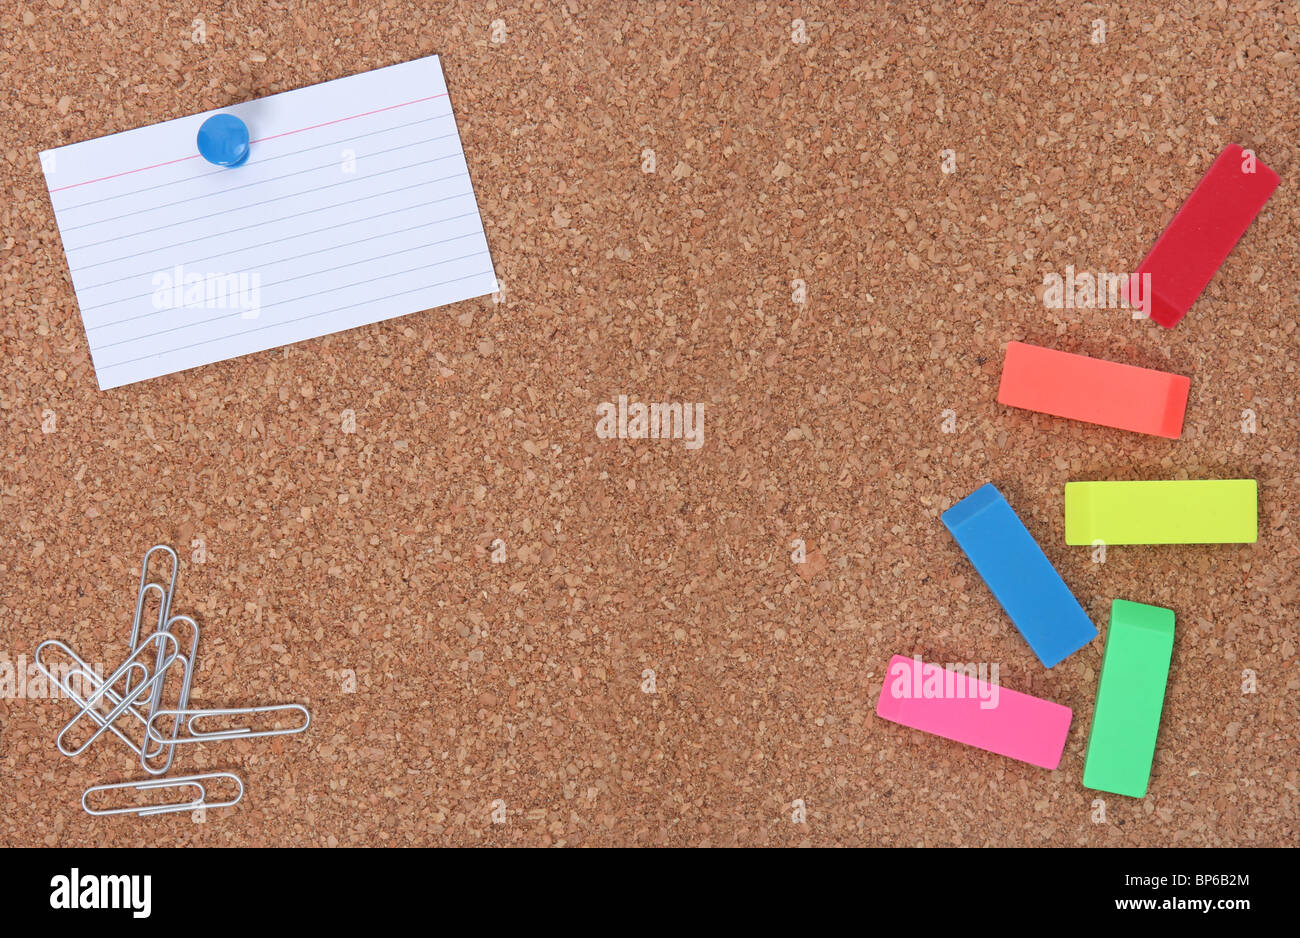 Cork Board With School Supplies and Copy Space for Your Text Stock Photo